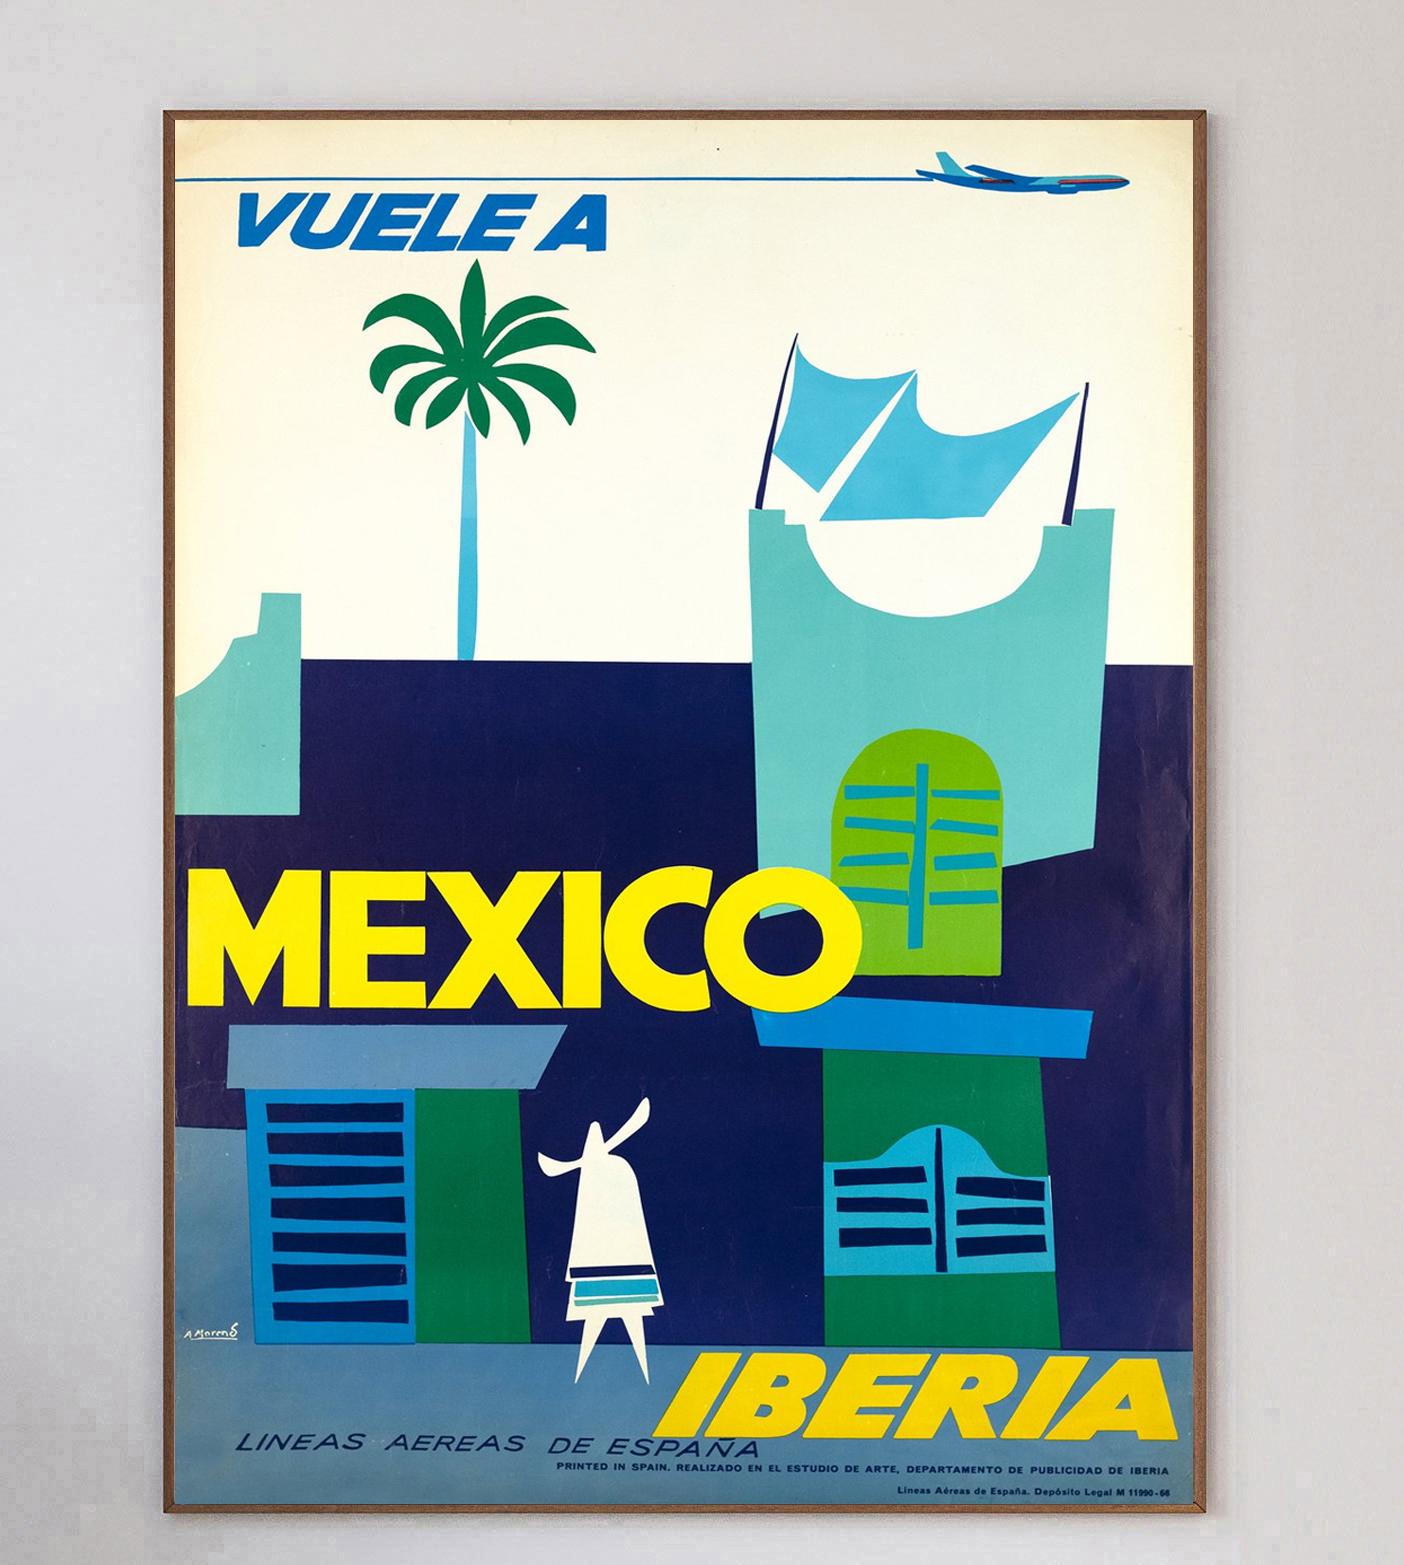 Beautiful poster from 1966 promoting Iberia airlines routes to Mexico. The Spanish airline was founded in 1927 and continues strong to this day. With brilliant Art Deco design depicting a city scene in the Central American country, this poster was